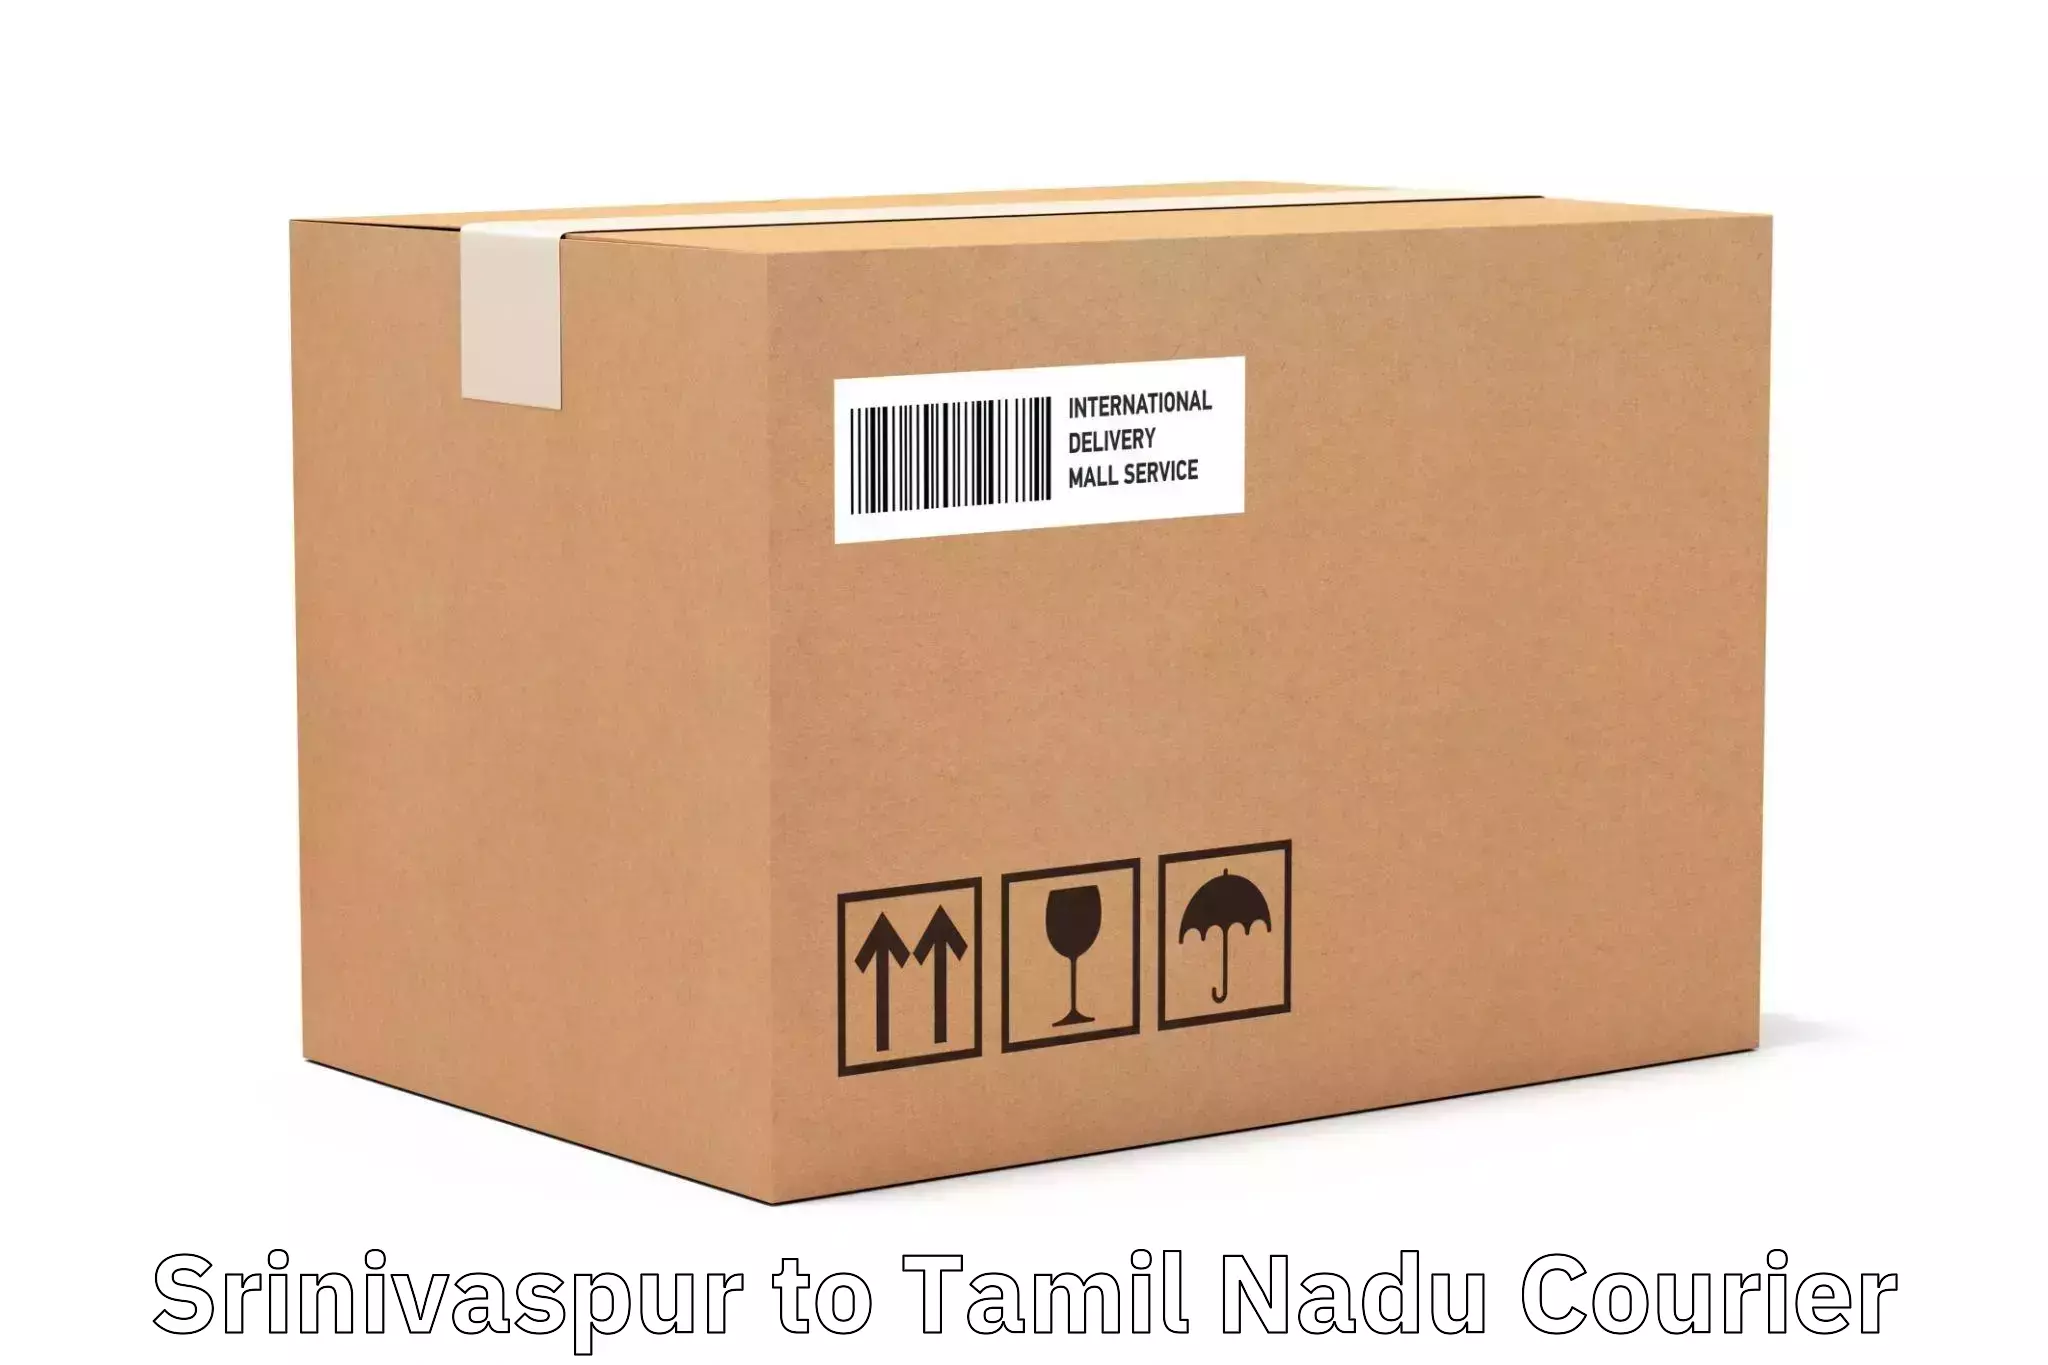 Advanced tracking systems Srinivaspur to Tamil Nadu Agricultural University Coimbatore